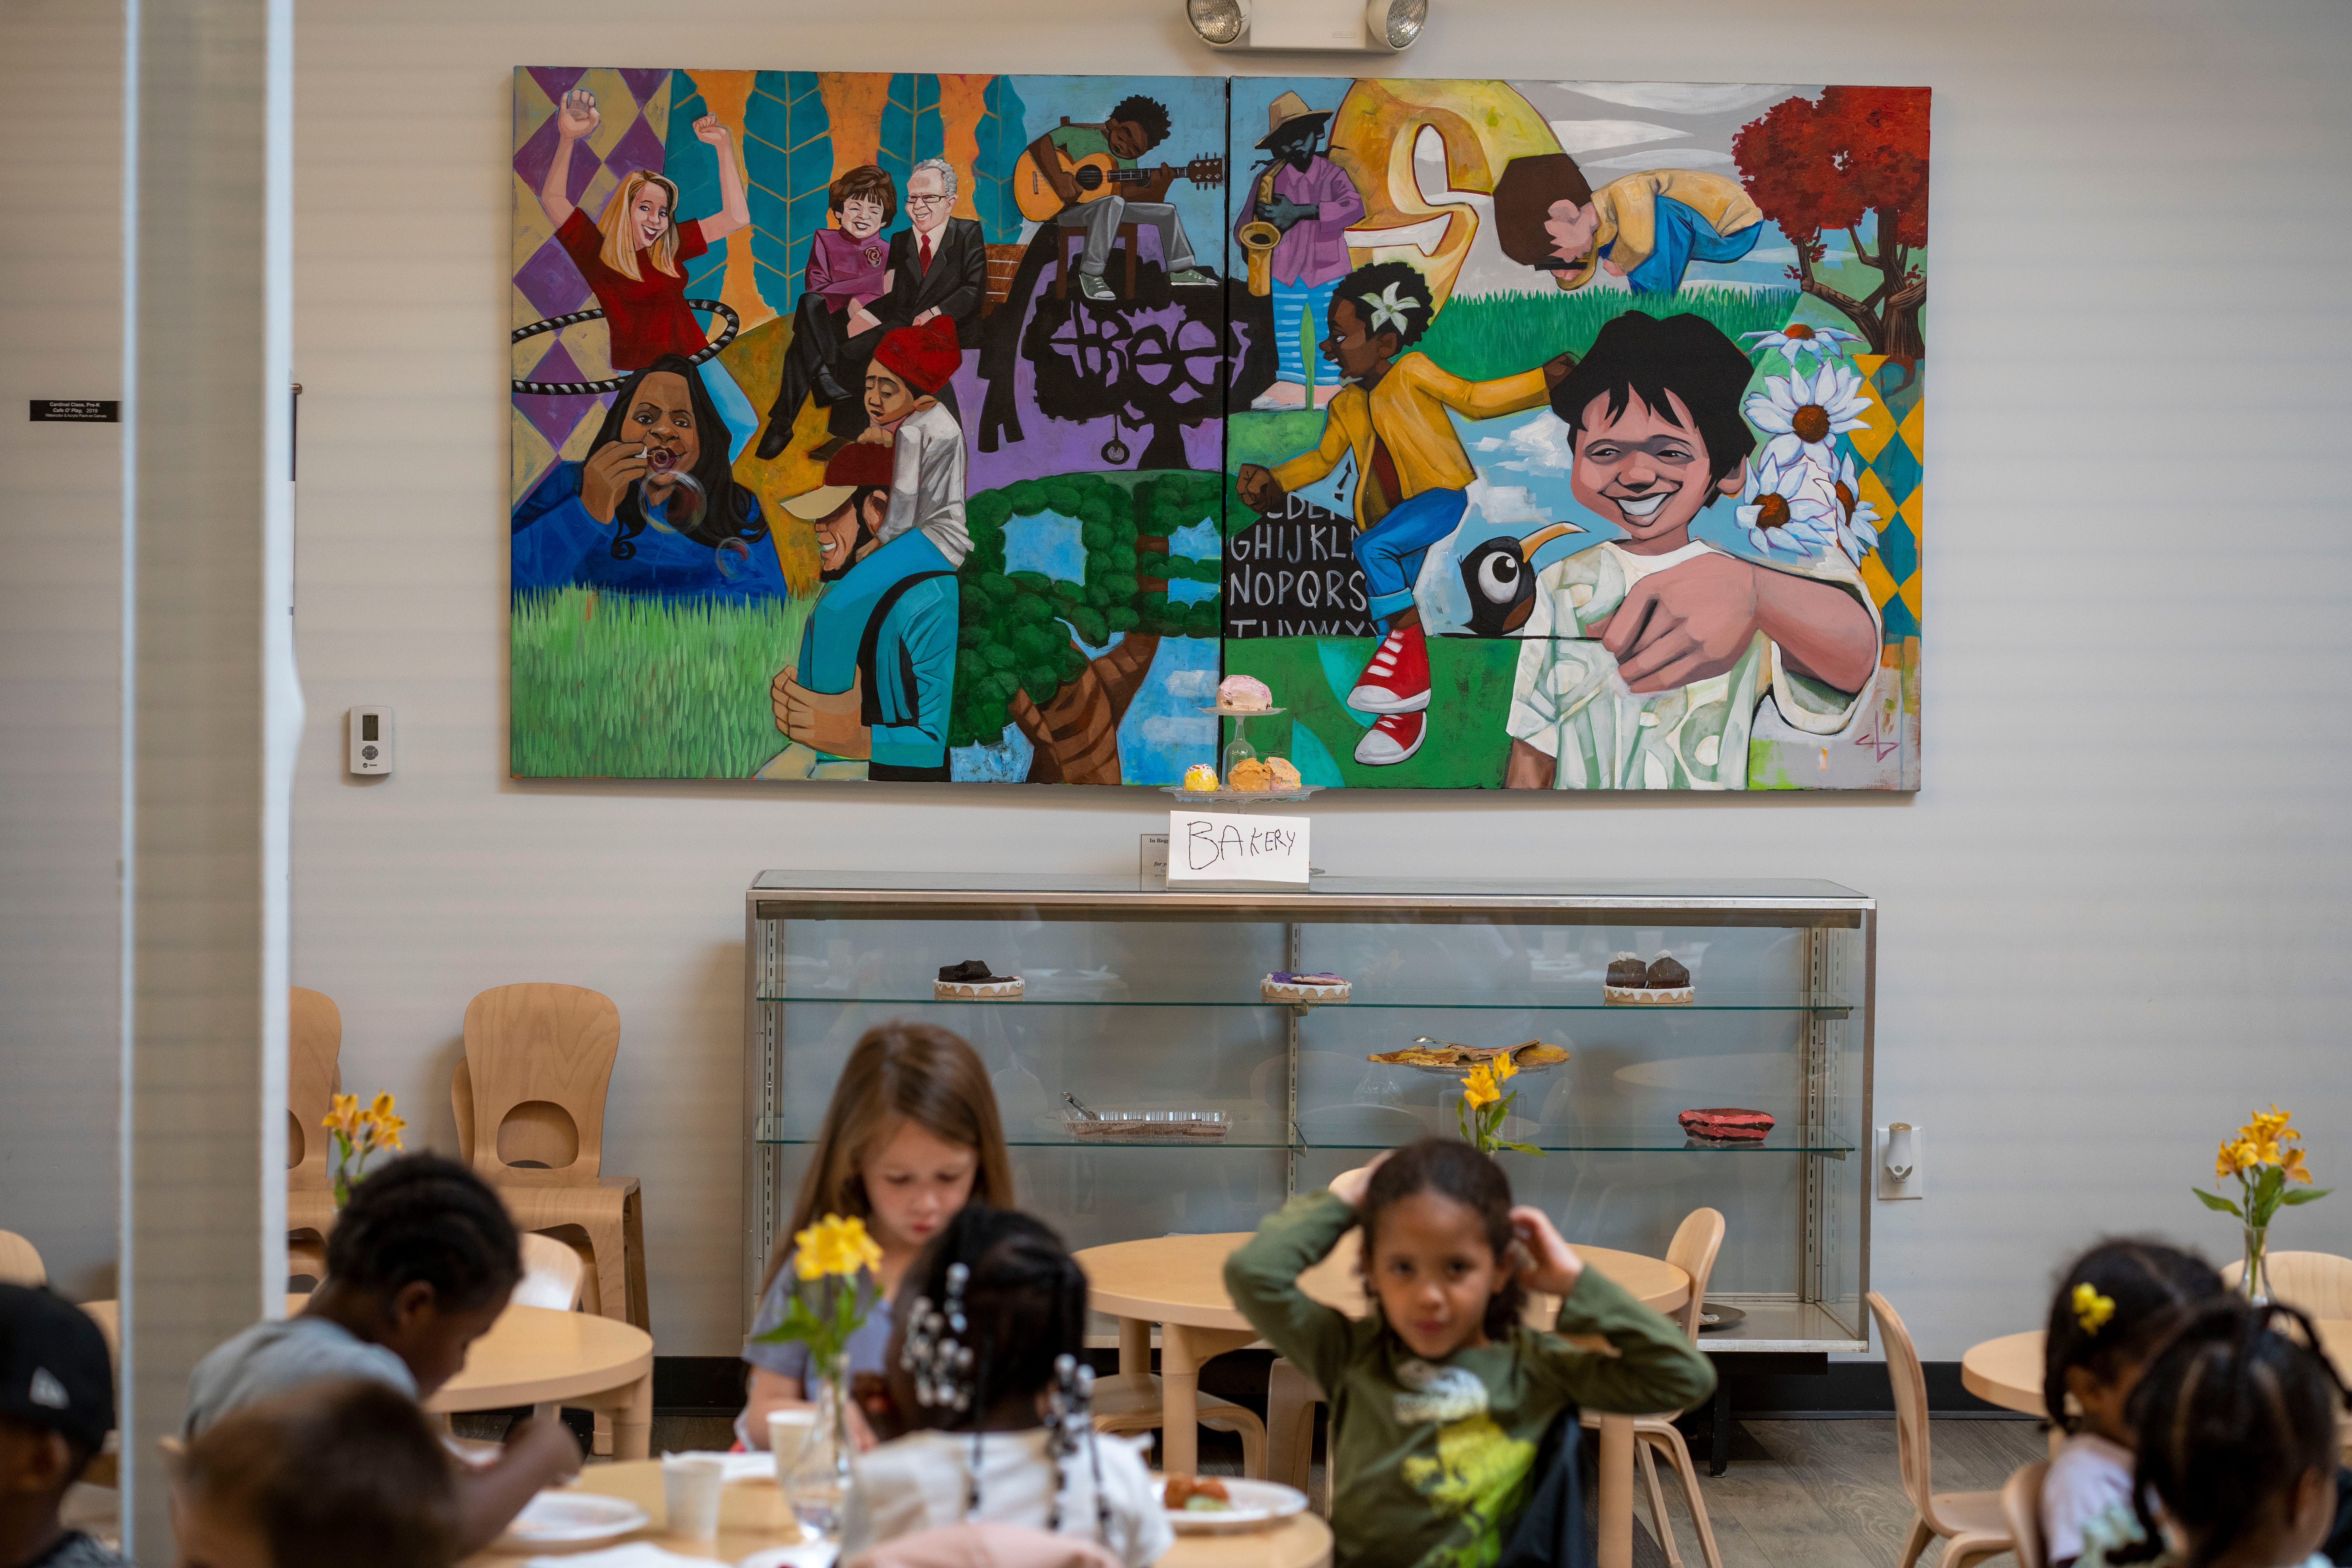 The Urban Sprouts Child Development Center in University City, Mo., encourages students to guide their own learning. Every day, children enjoy farm-to-table, home-cooked meals.